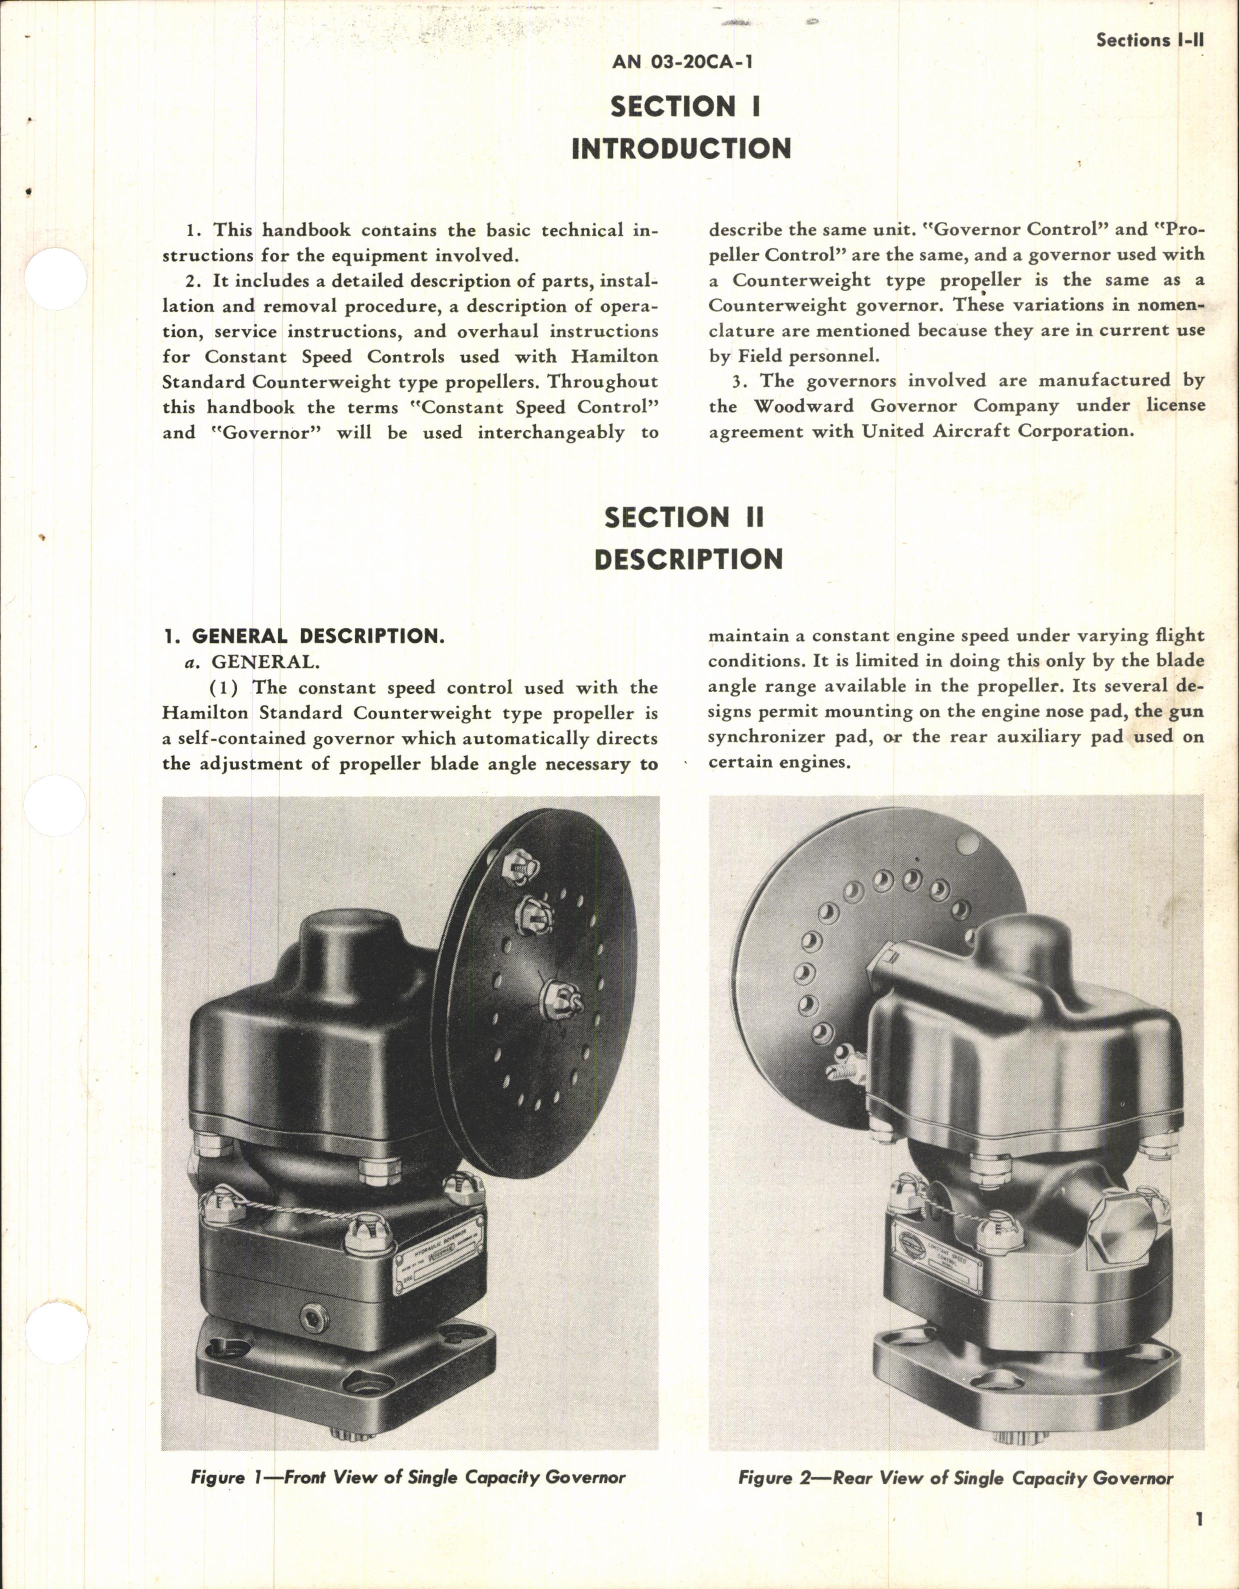 Sample page 5 from AirCorps Library document: Handbook of Instructions with Parts Catalog for Constant Speed Propeller Governors and Controls for Counterweight Propellers